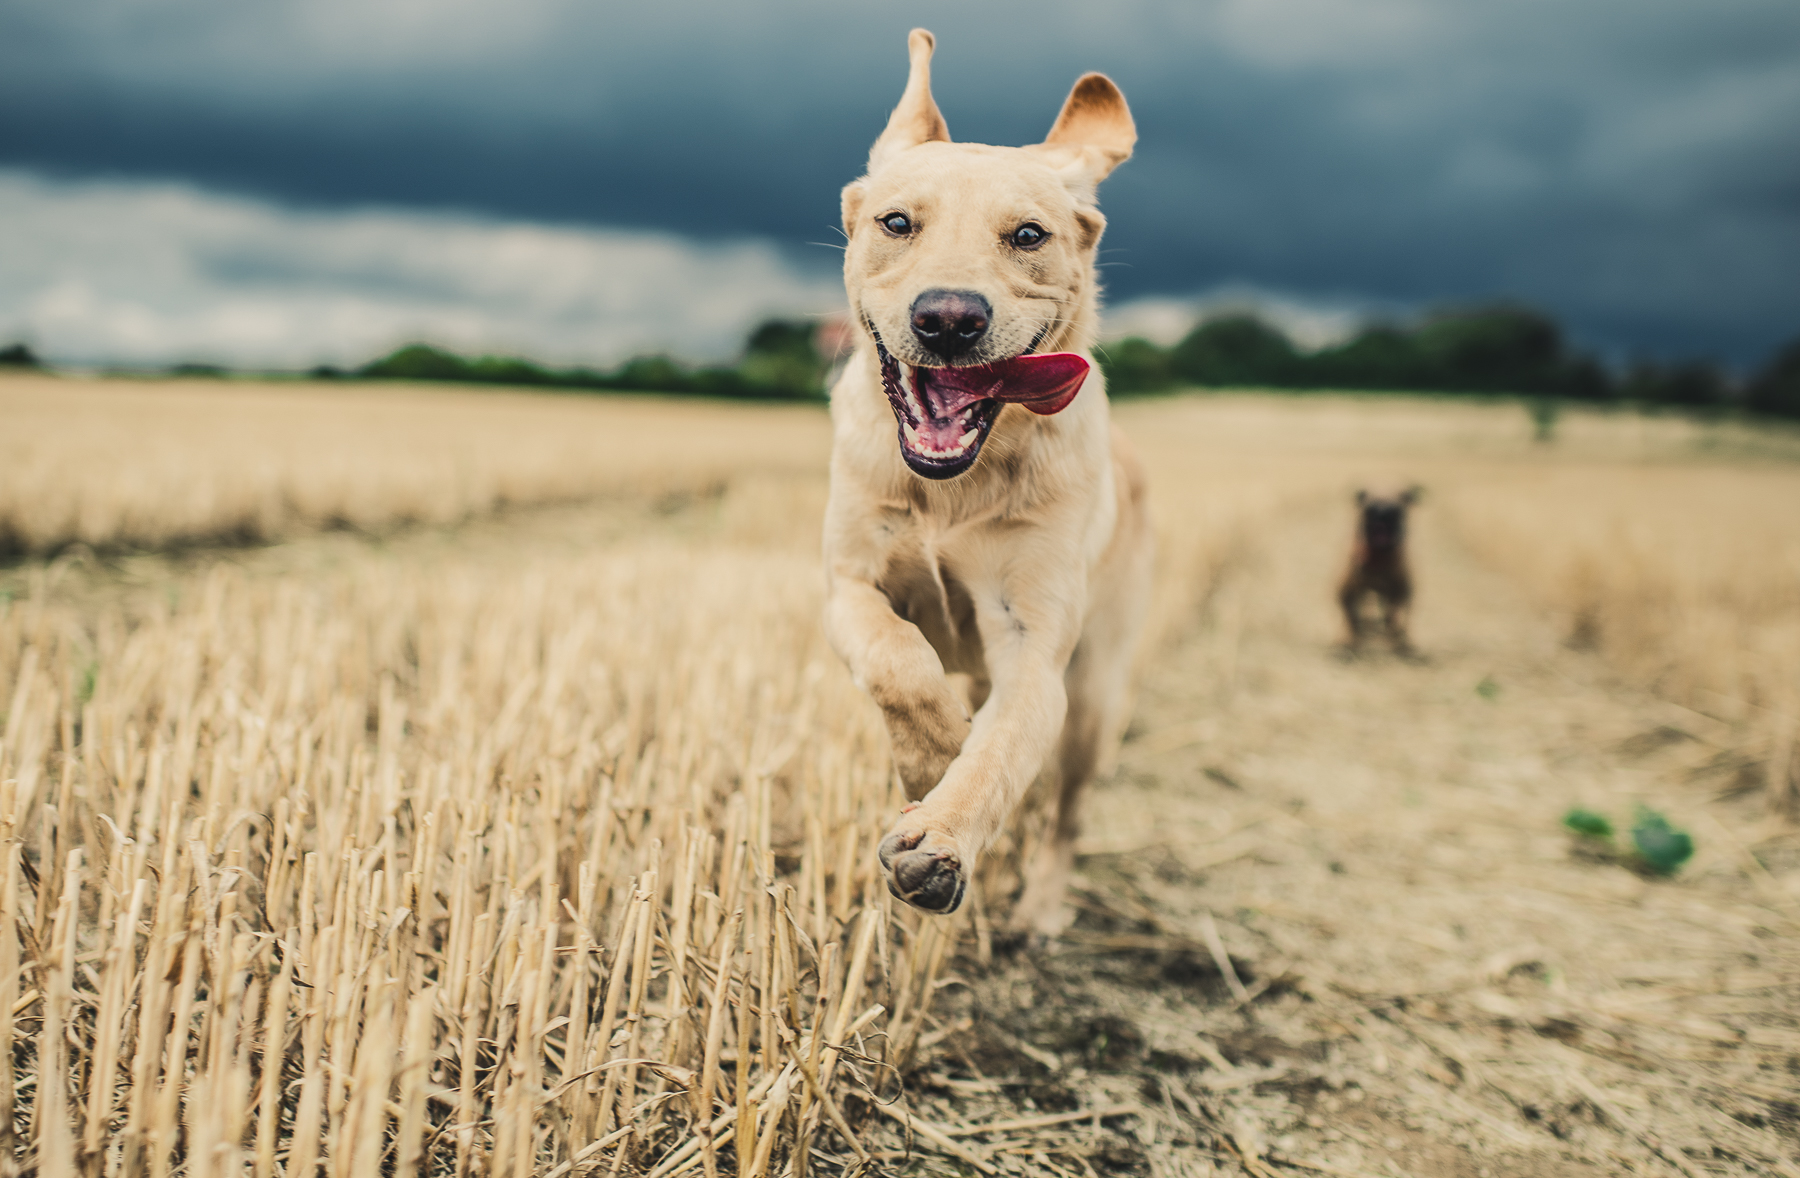 dog being chased through field